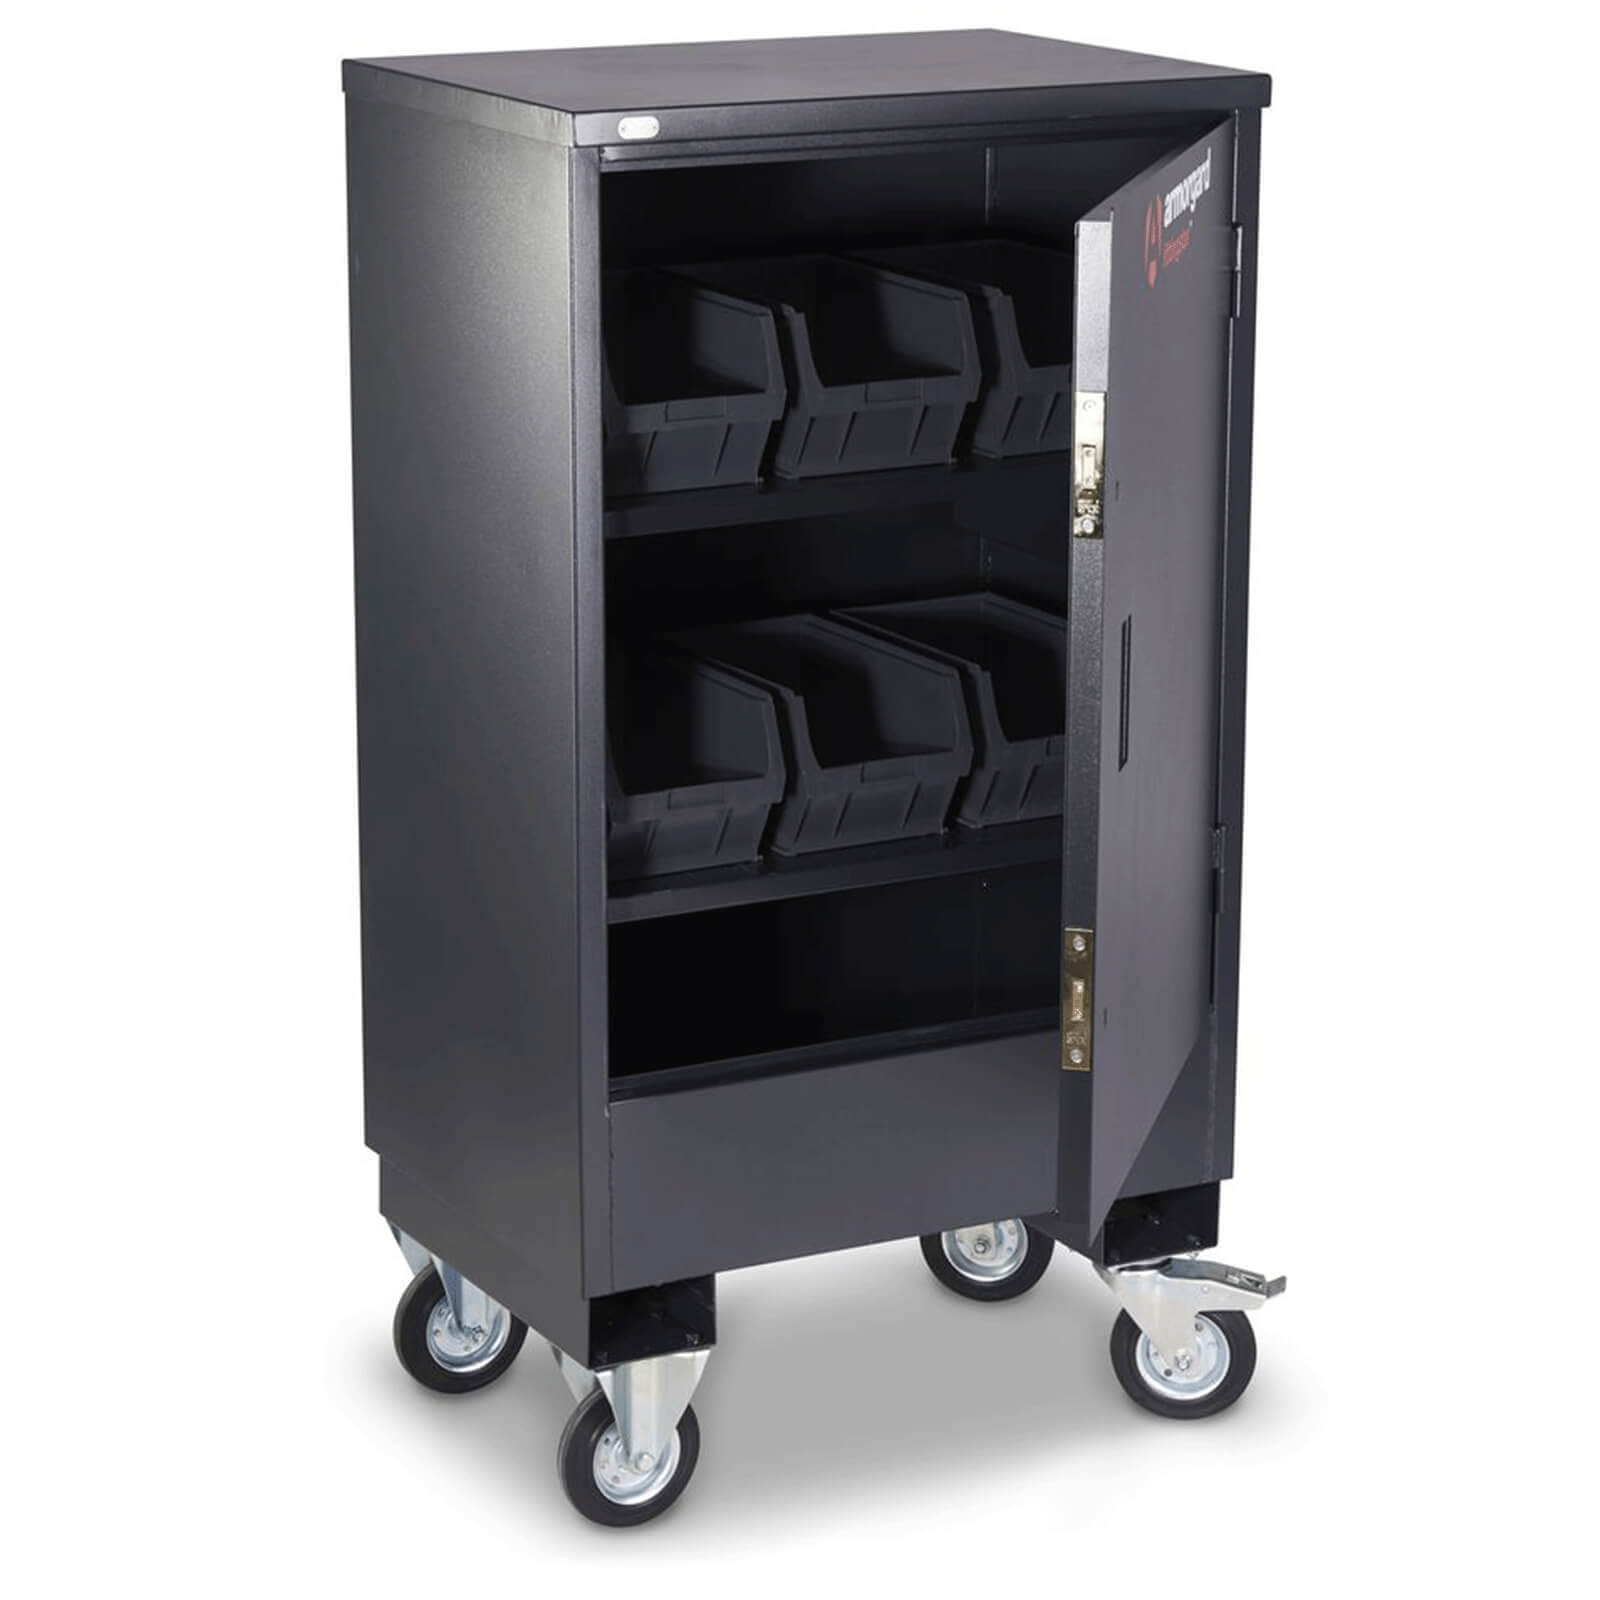 Image of Armorgard Fittingstor Mobile Secure Fittings and Fixings Cabinet 800mm 555mm 1450mm